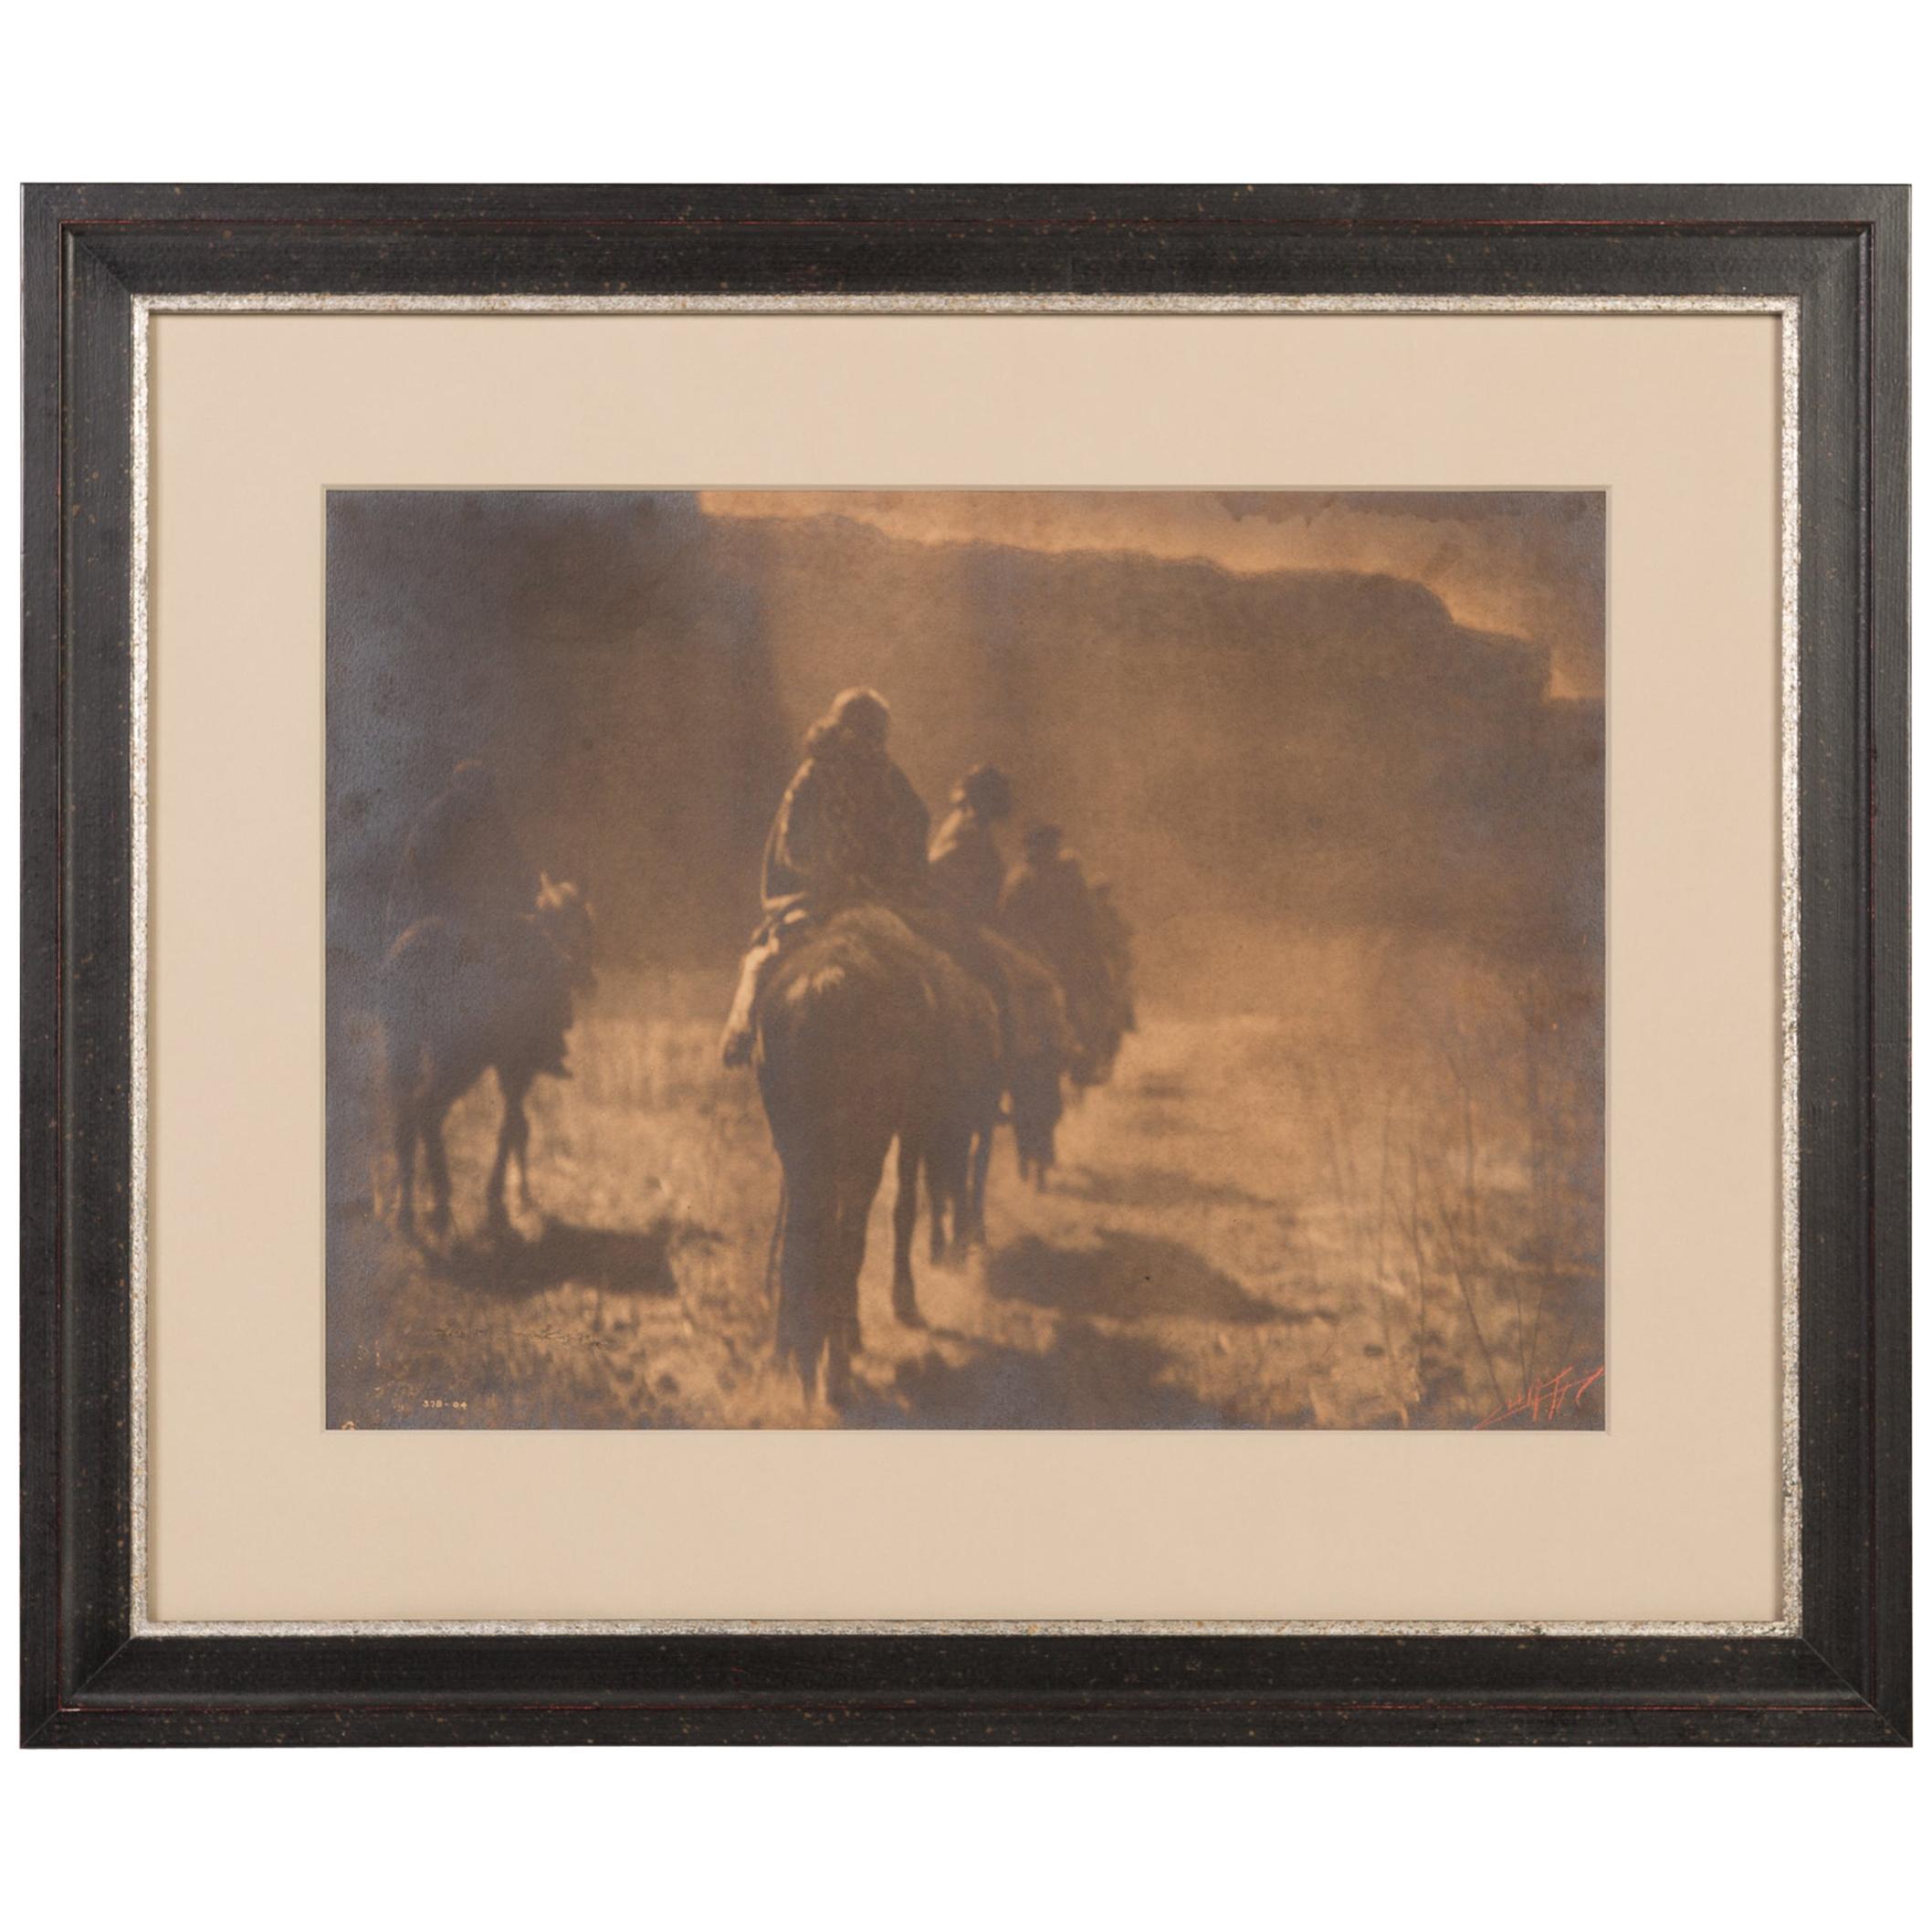 The Vanishing Race, Signed by Edward S. Curtis, Gelatin Silver Photograph, 1904